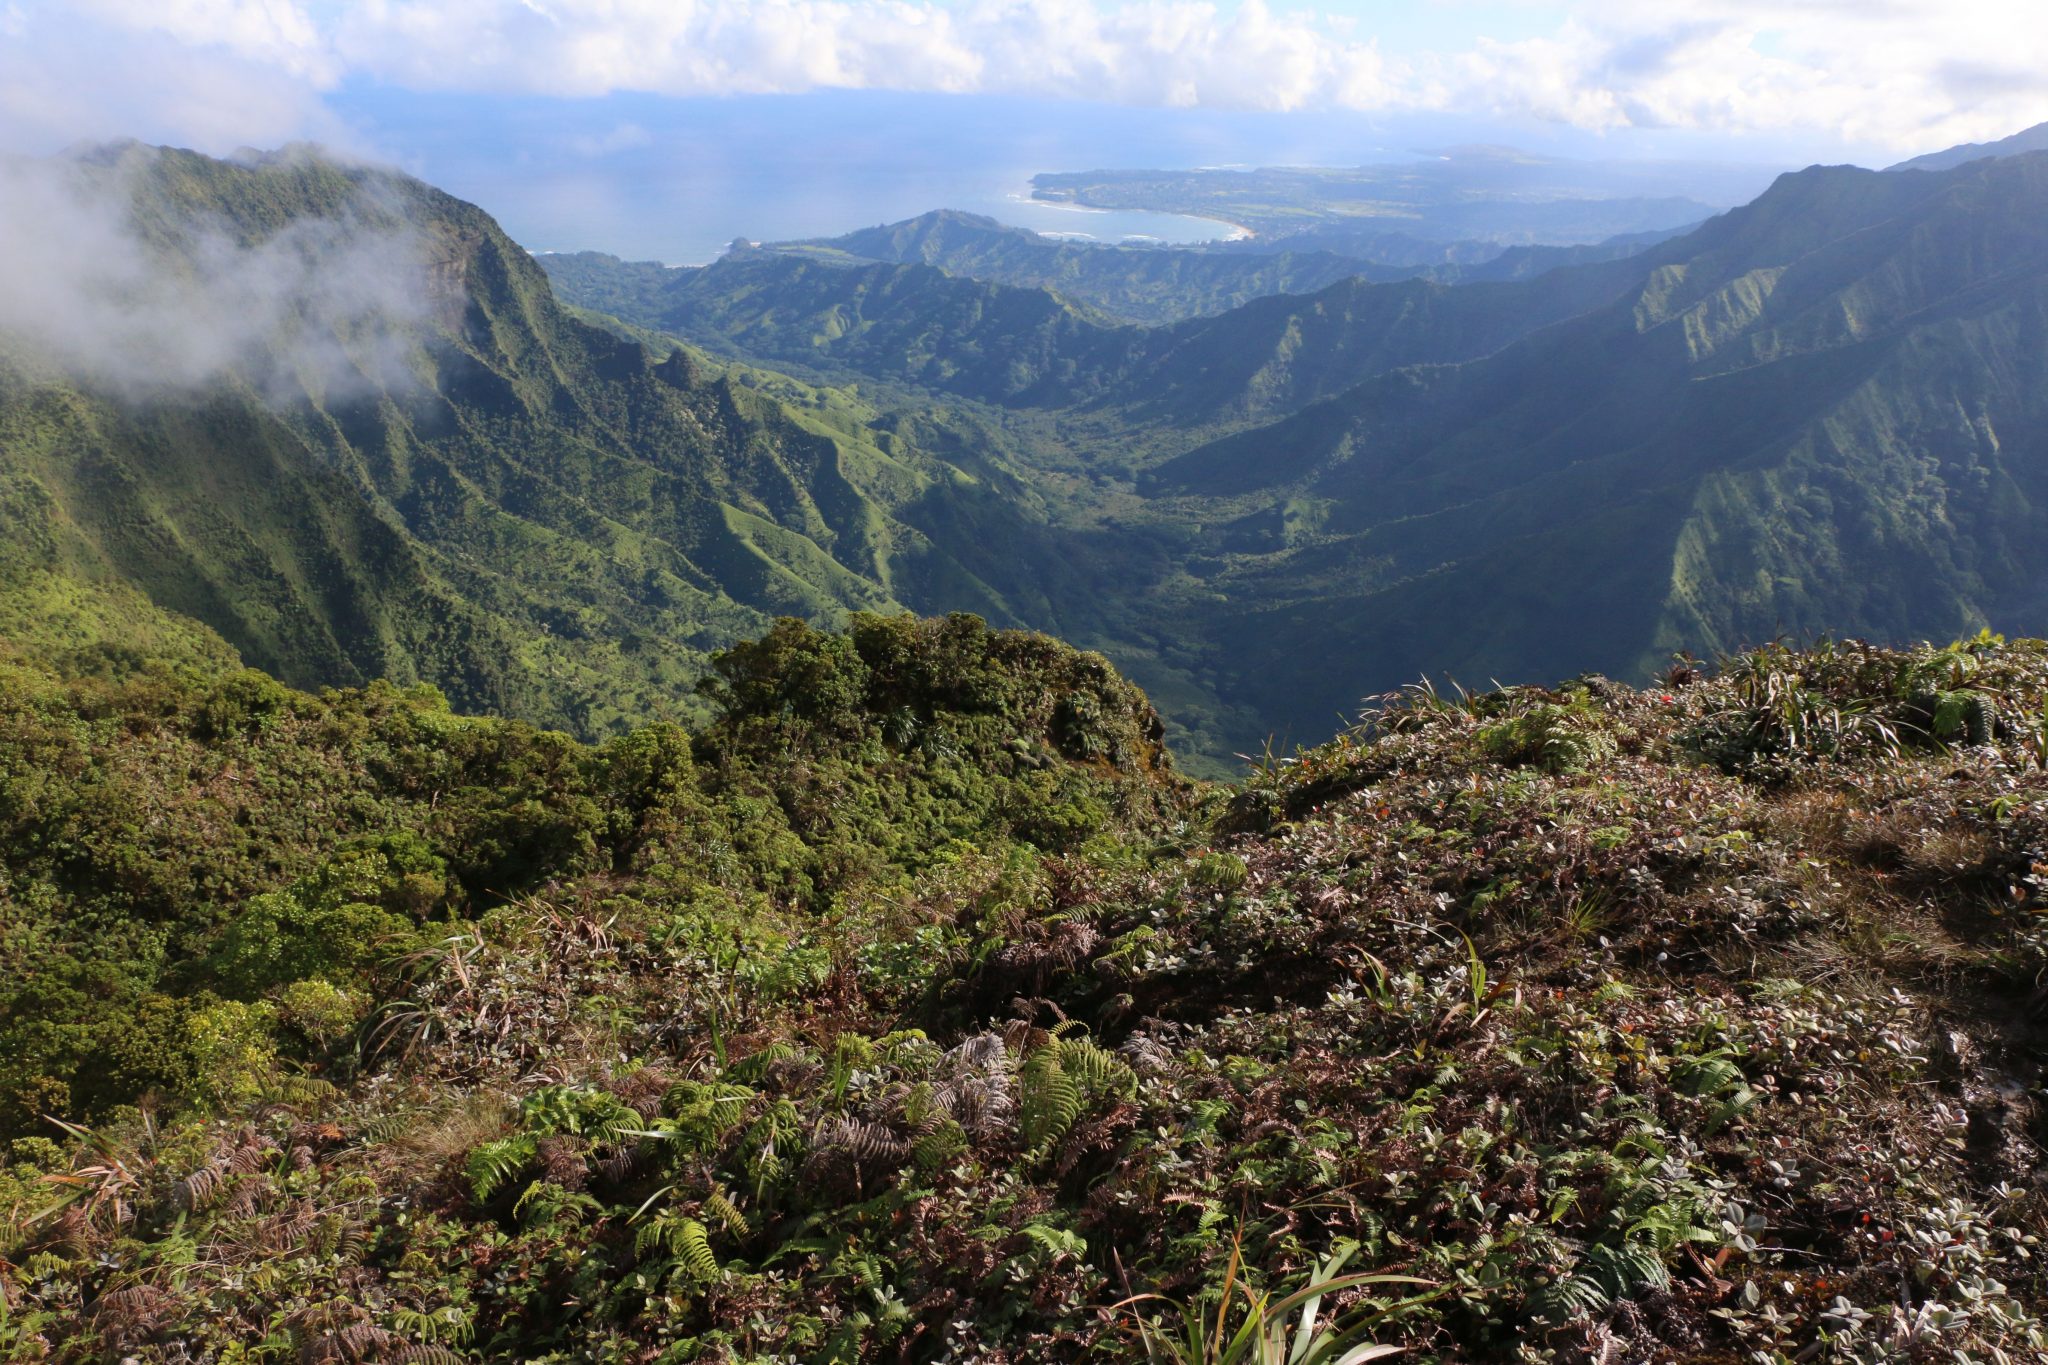 An image of a forested Hawaiʻi landscape